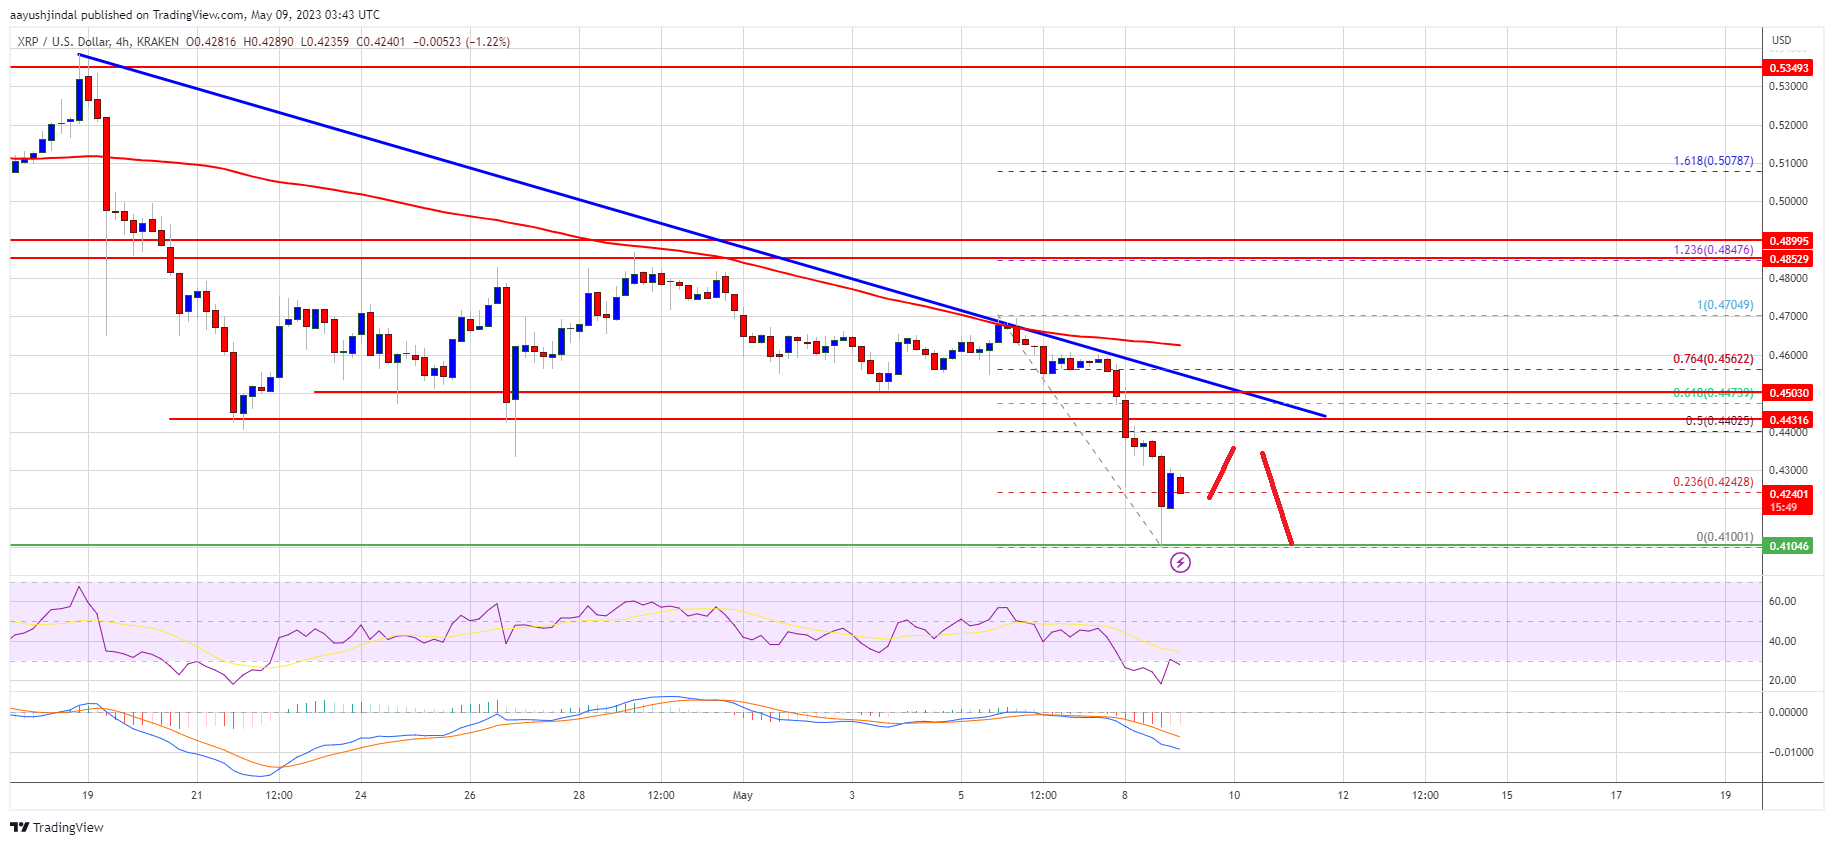 XRP Price Prediction: Ripple Plunges to $0.42: Can Bulls Save the Day?